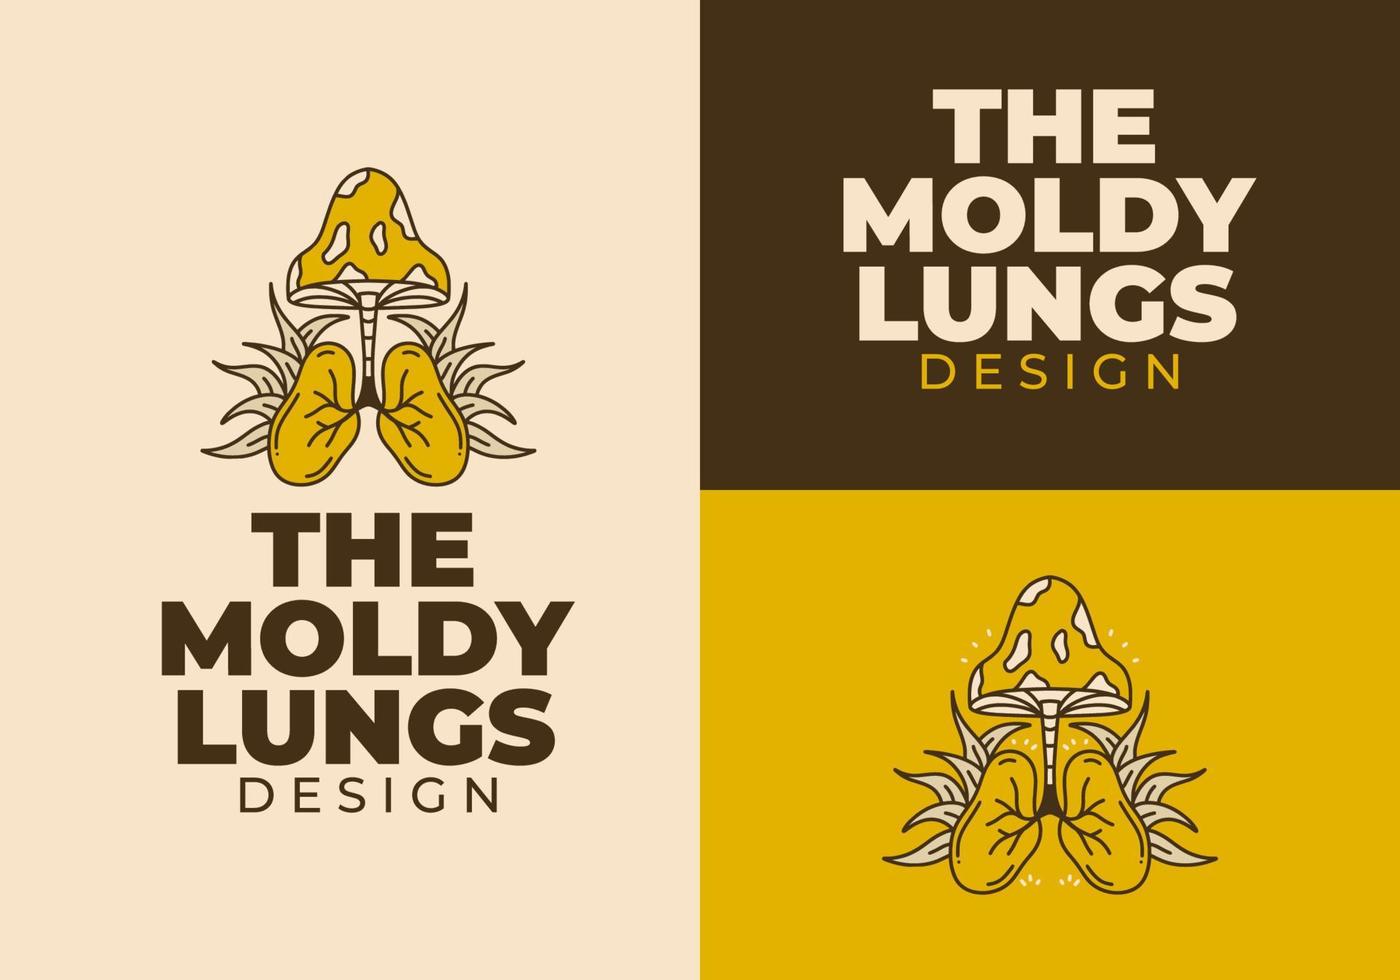 Vintage art illustration of the Lungs and mold vector